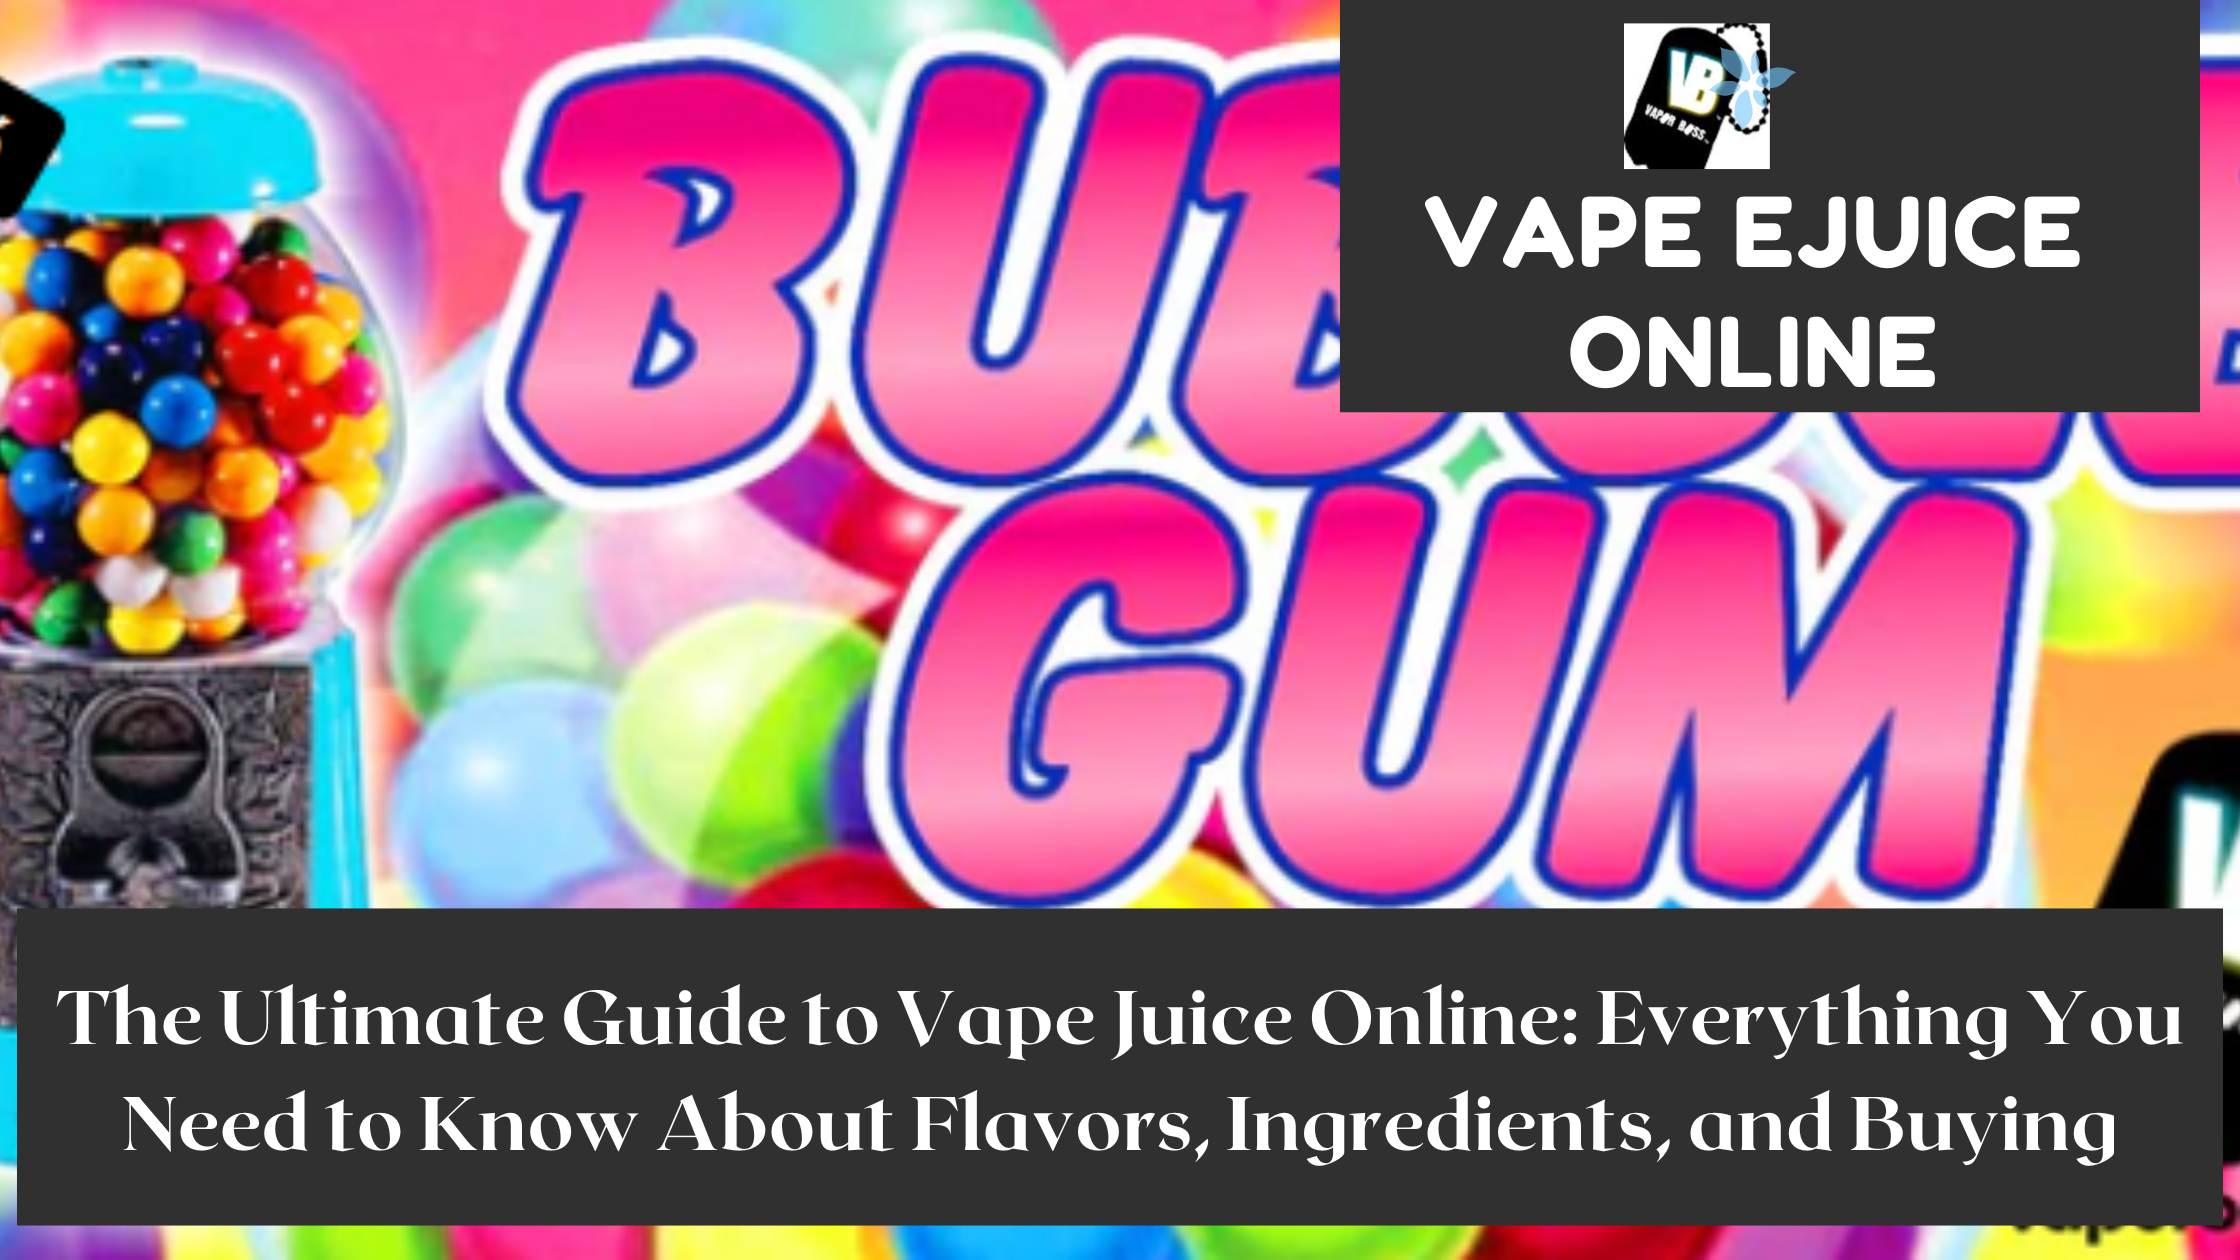 The Ultimate Guide to Vape Juice Online: Everything You Need to Know About Flavors, Ingredients, and Buying